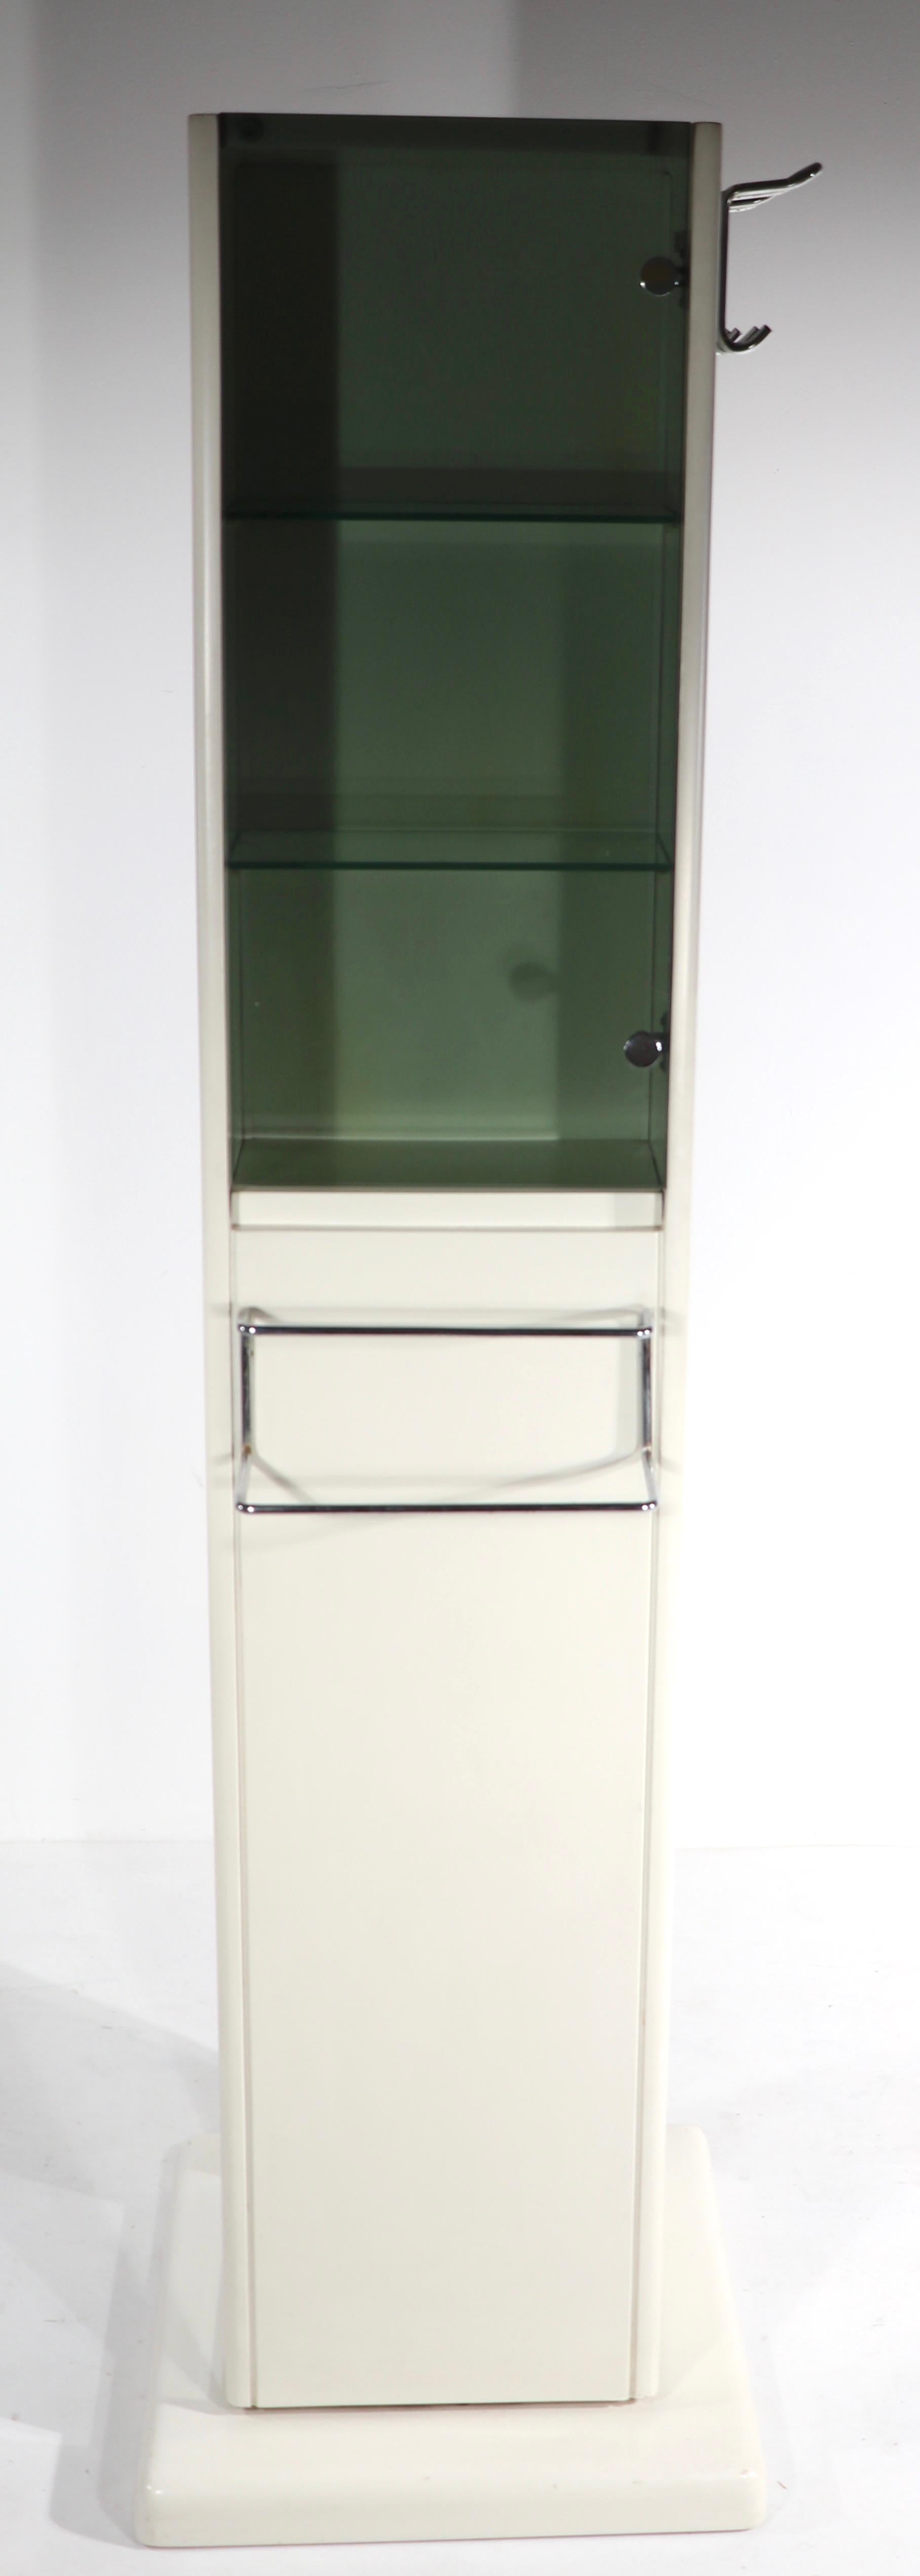 Unusual revolving storage unit having tinted glass doors, drawers, a bread bin, and chrome hooks. The totem like center post rotates to allow easy access to the various storage bins. Done in the Italian Postmodern style, we believe it is actually